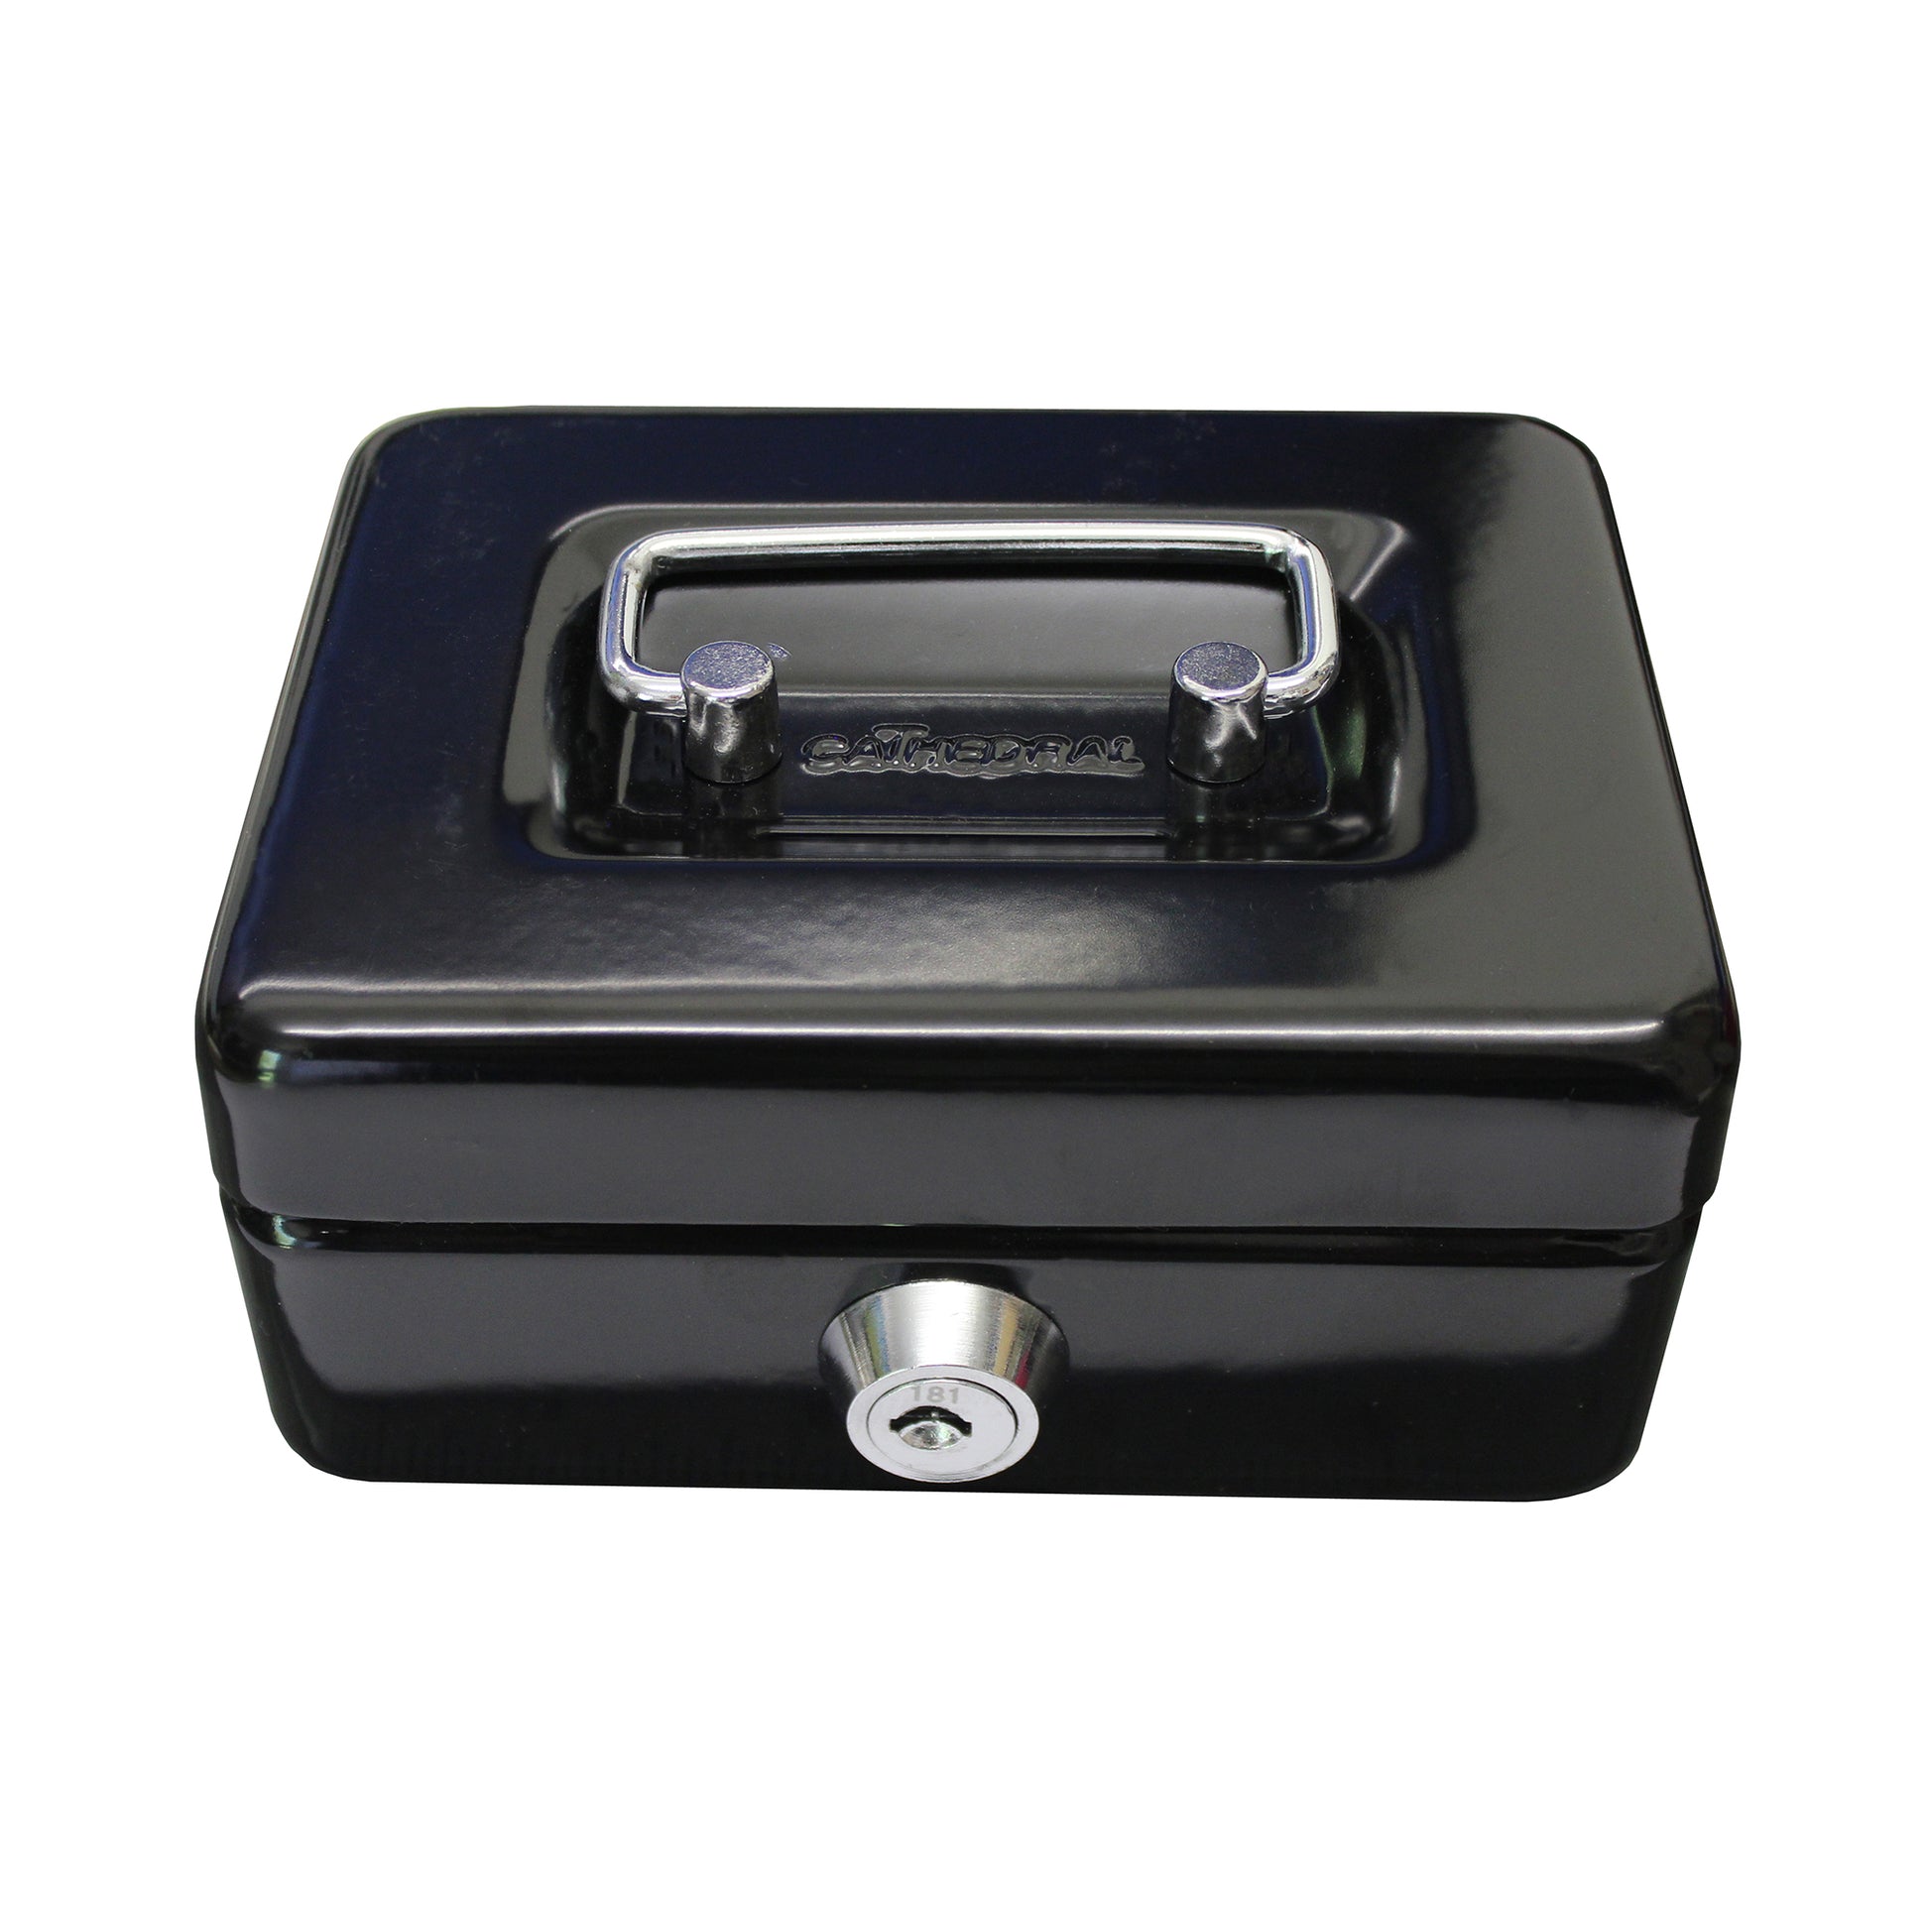 A closed gloss black 4-inch key lockable cash box with a coin slot in the lid. The box features a sturdy metal handle and a secure lock at the front for safekeeping of cash and coins.